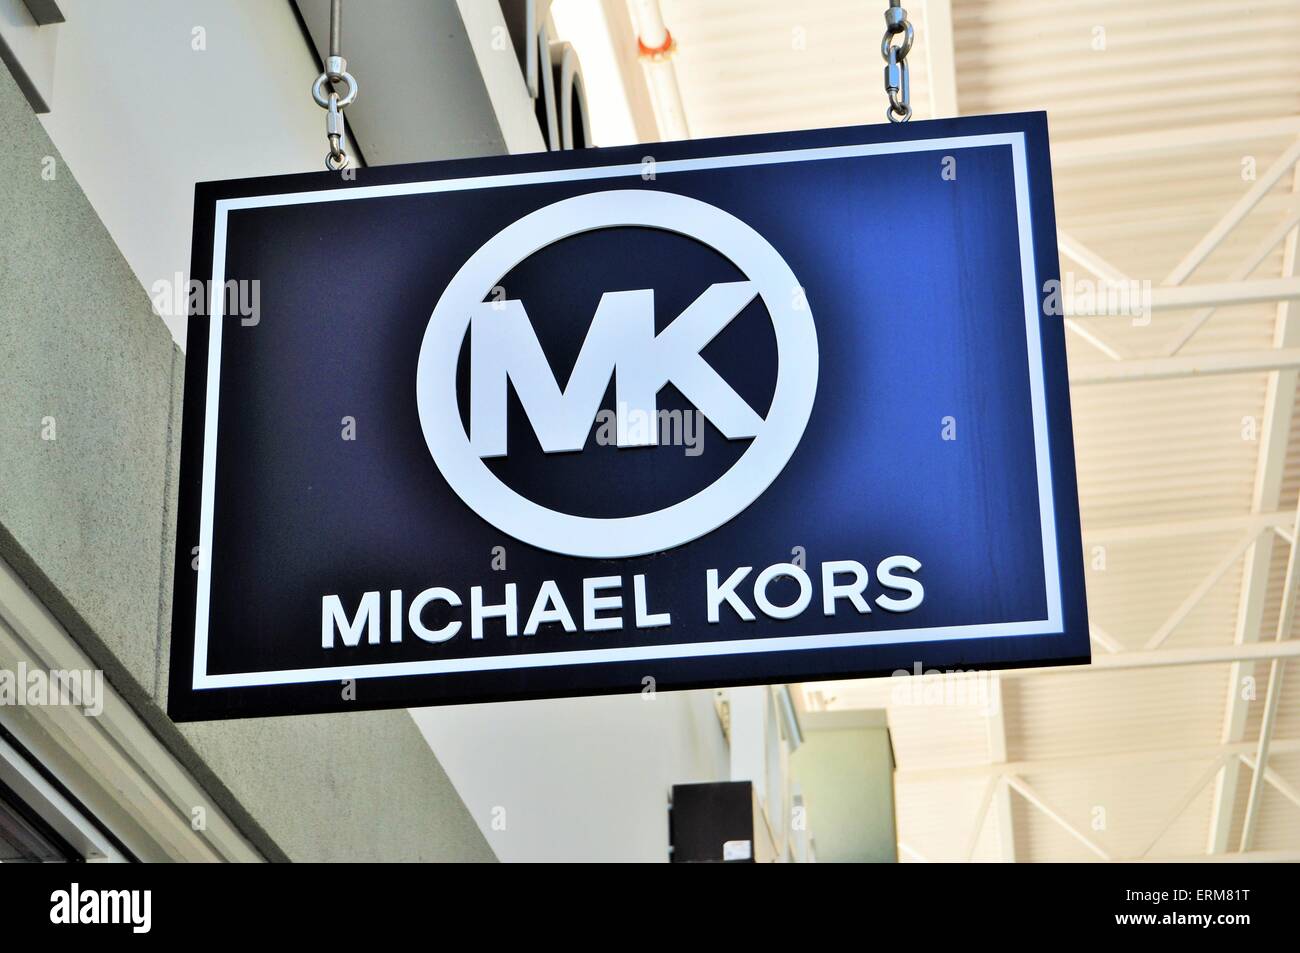 The Michael Kors Storefront at the MIllenia Mall in Orlando, Florida  Editorial Photo - Image of retail, classic: 185417686